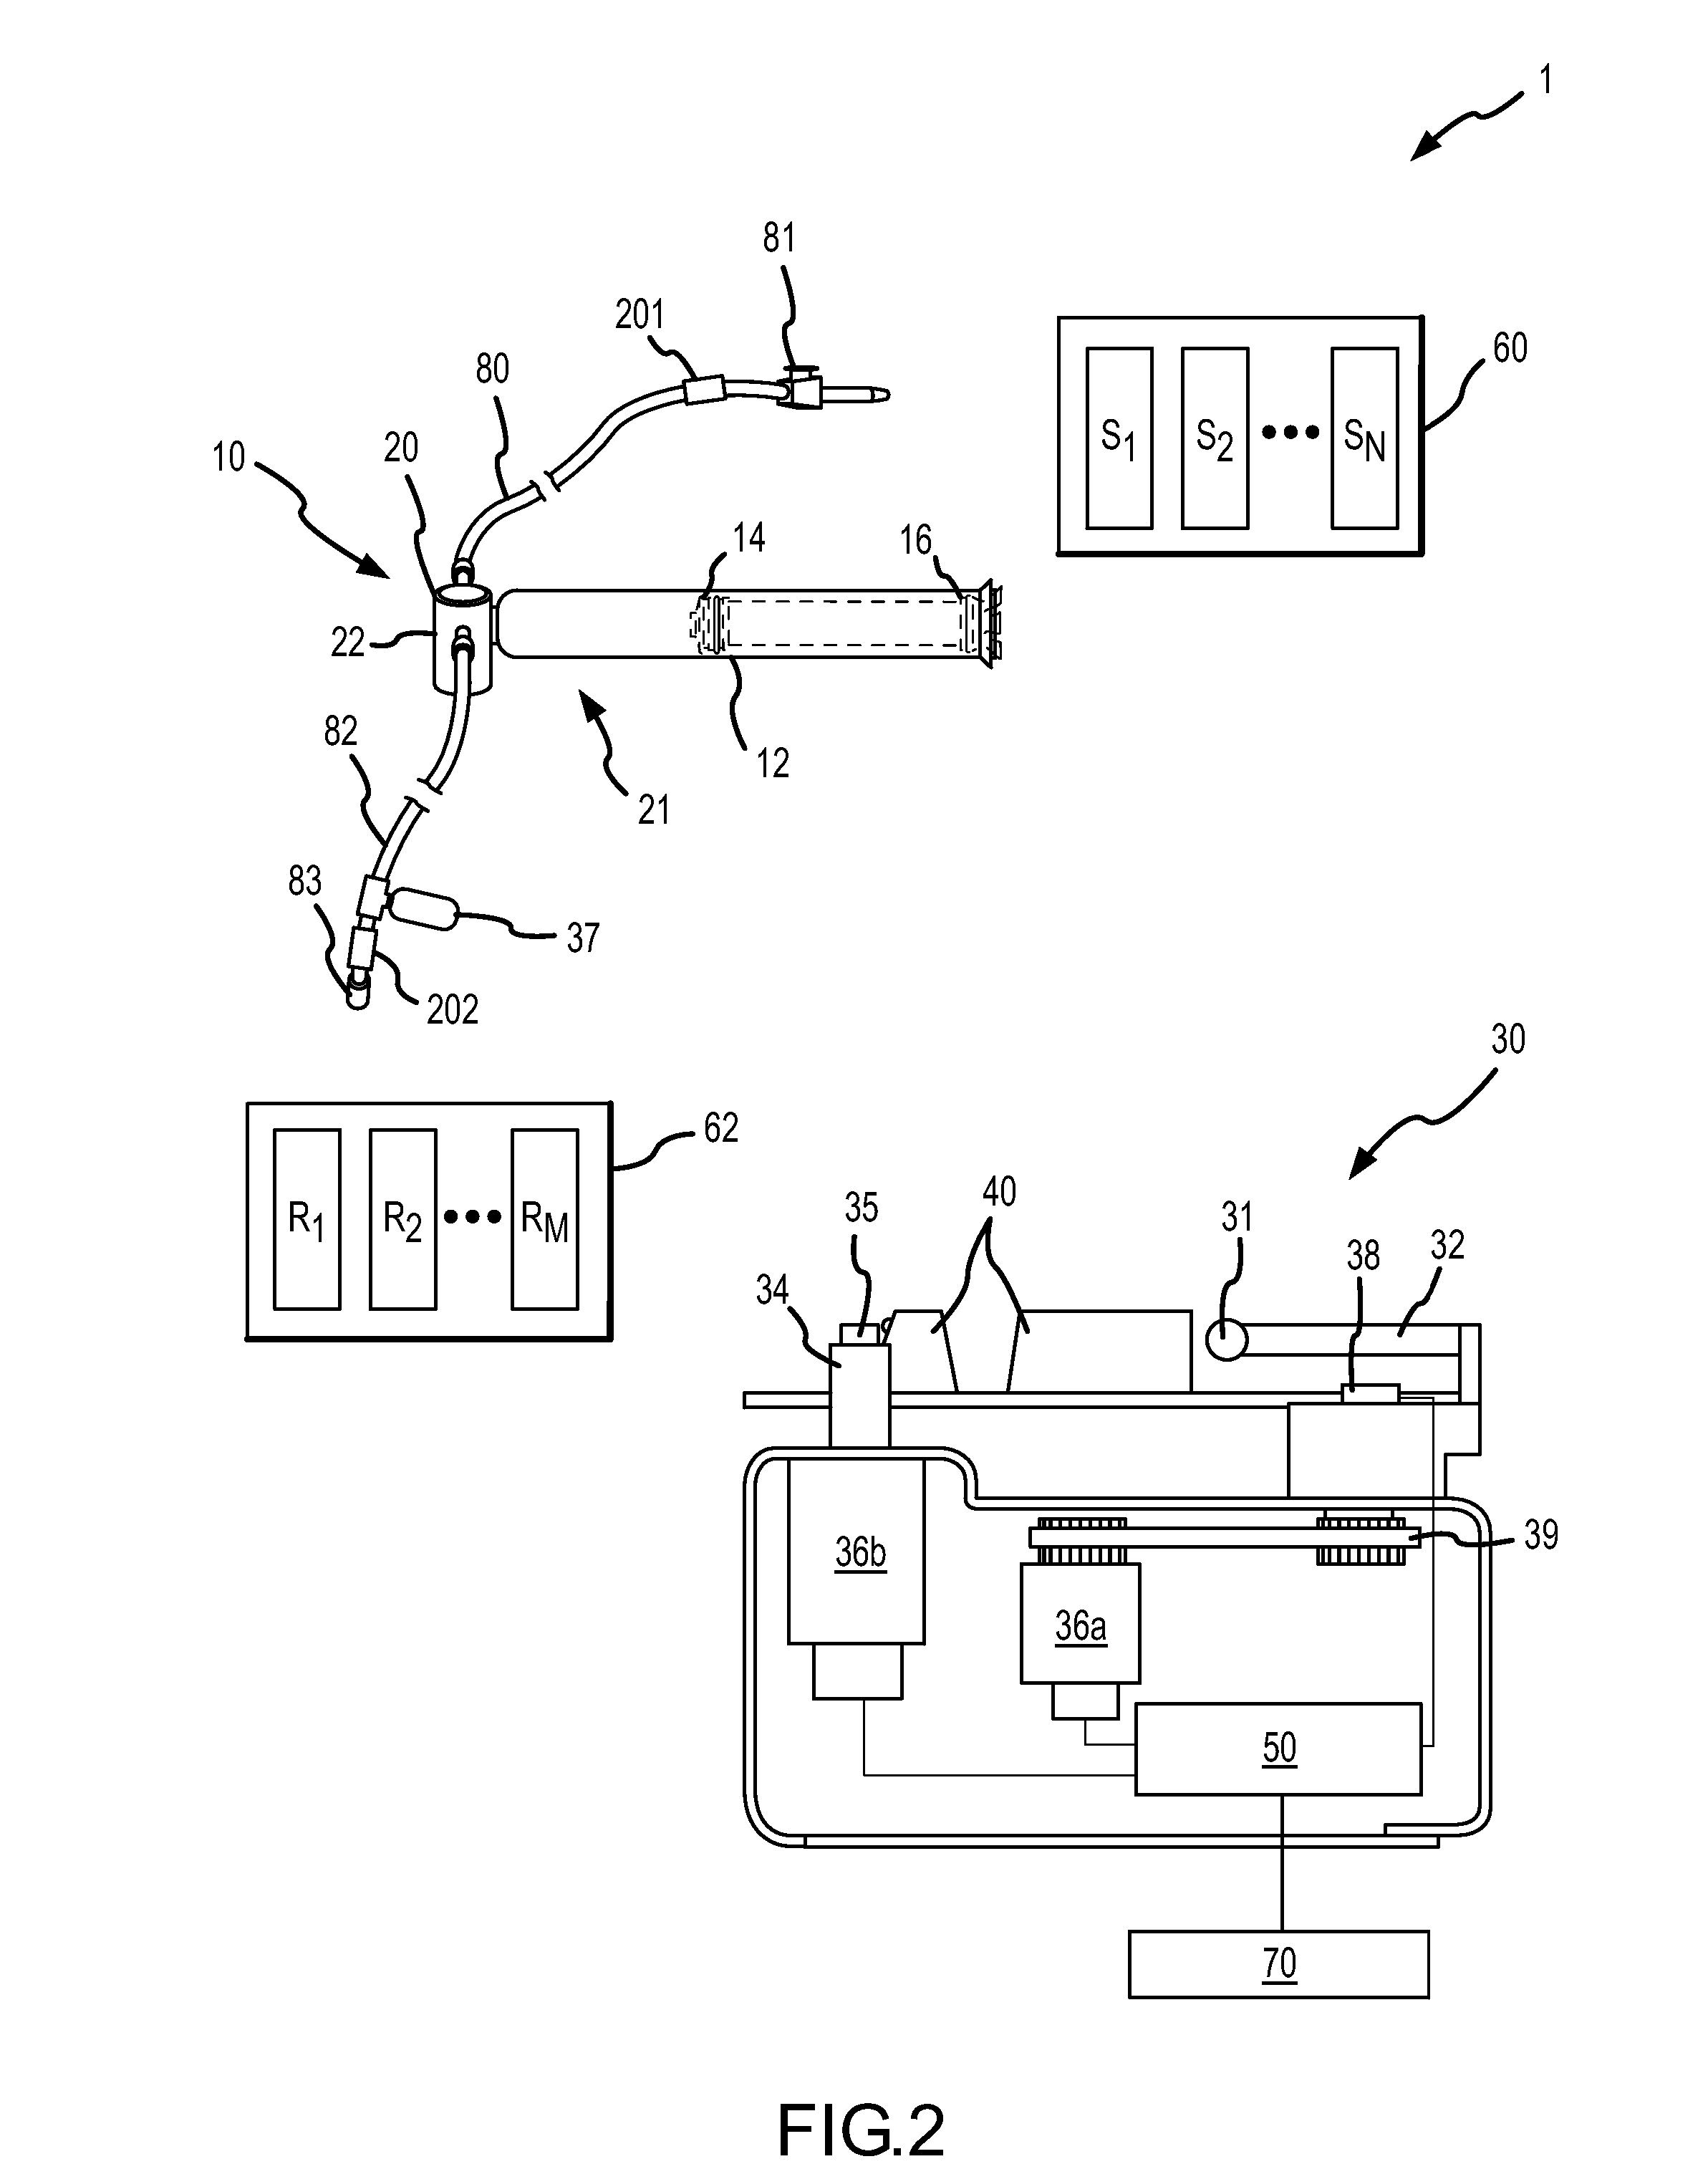 Automated medical liquid filling system and method